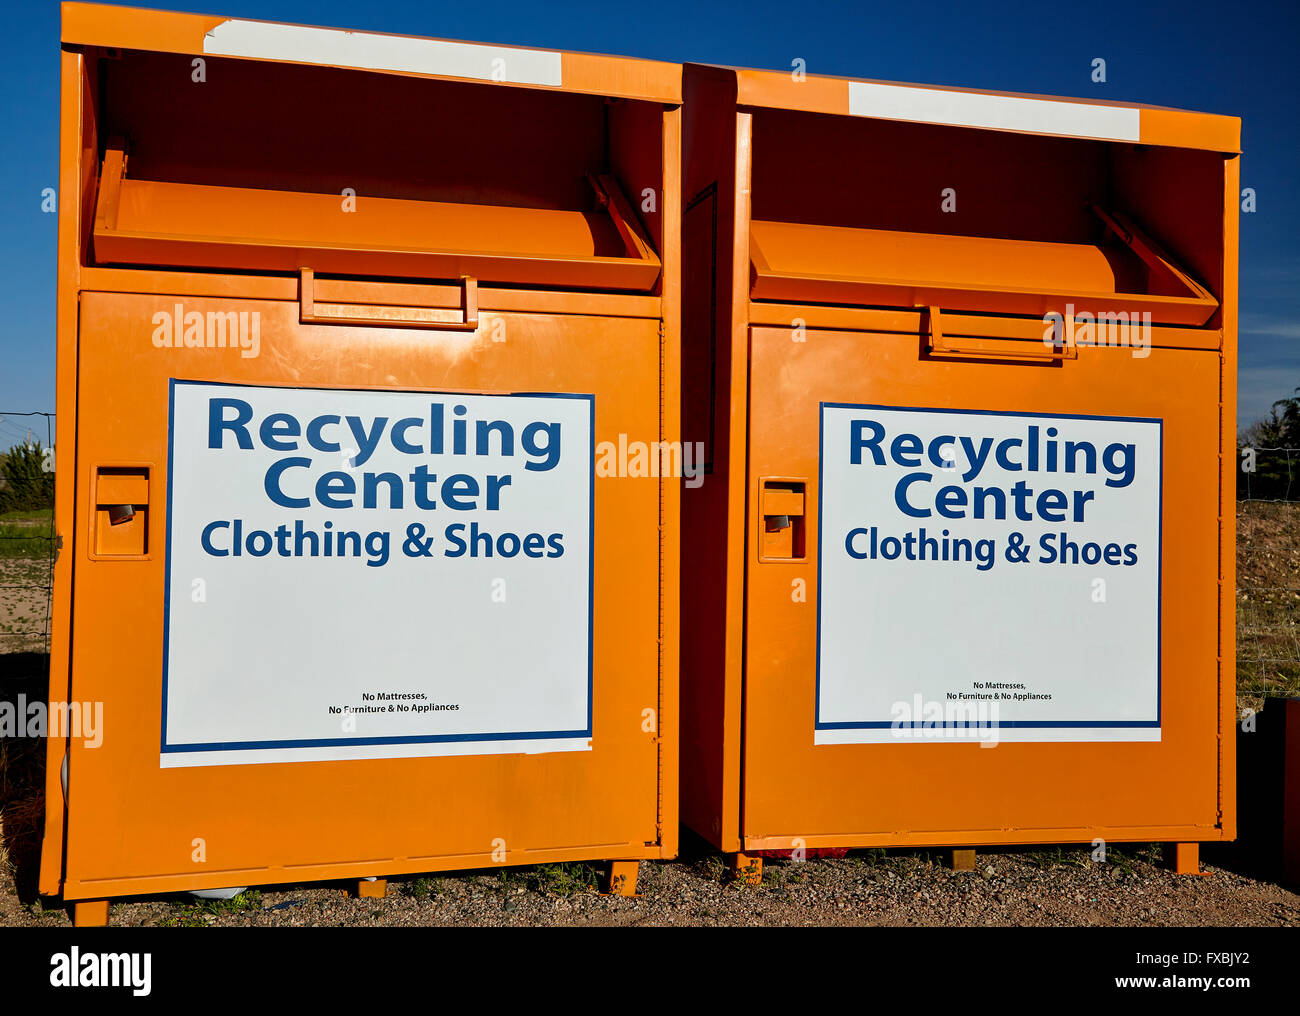 Recycling center collection bins for clothing disposal industry and waste management Stock Photo